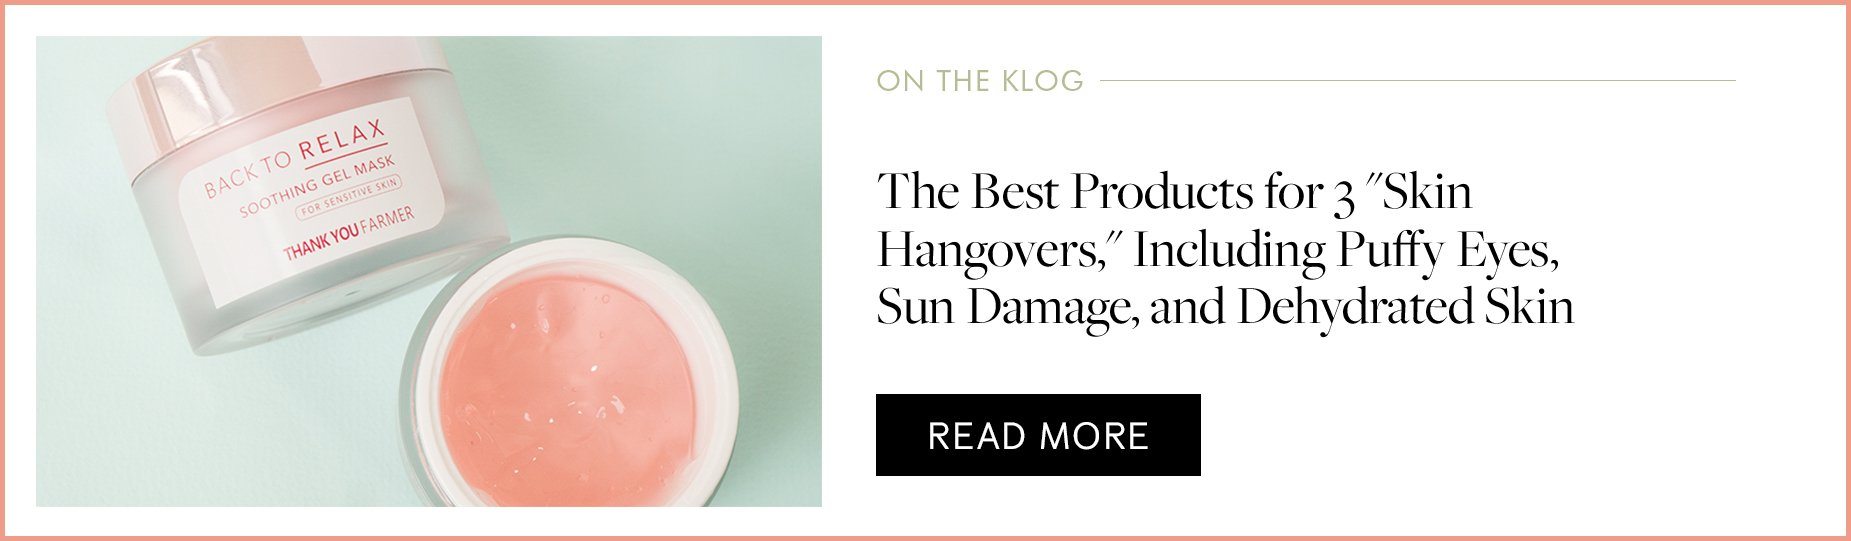 Best products for skin hangovers - read more